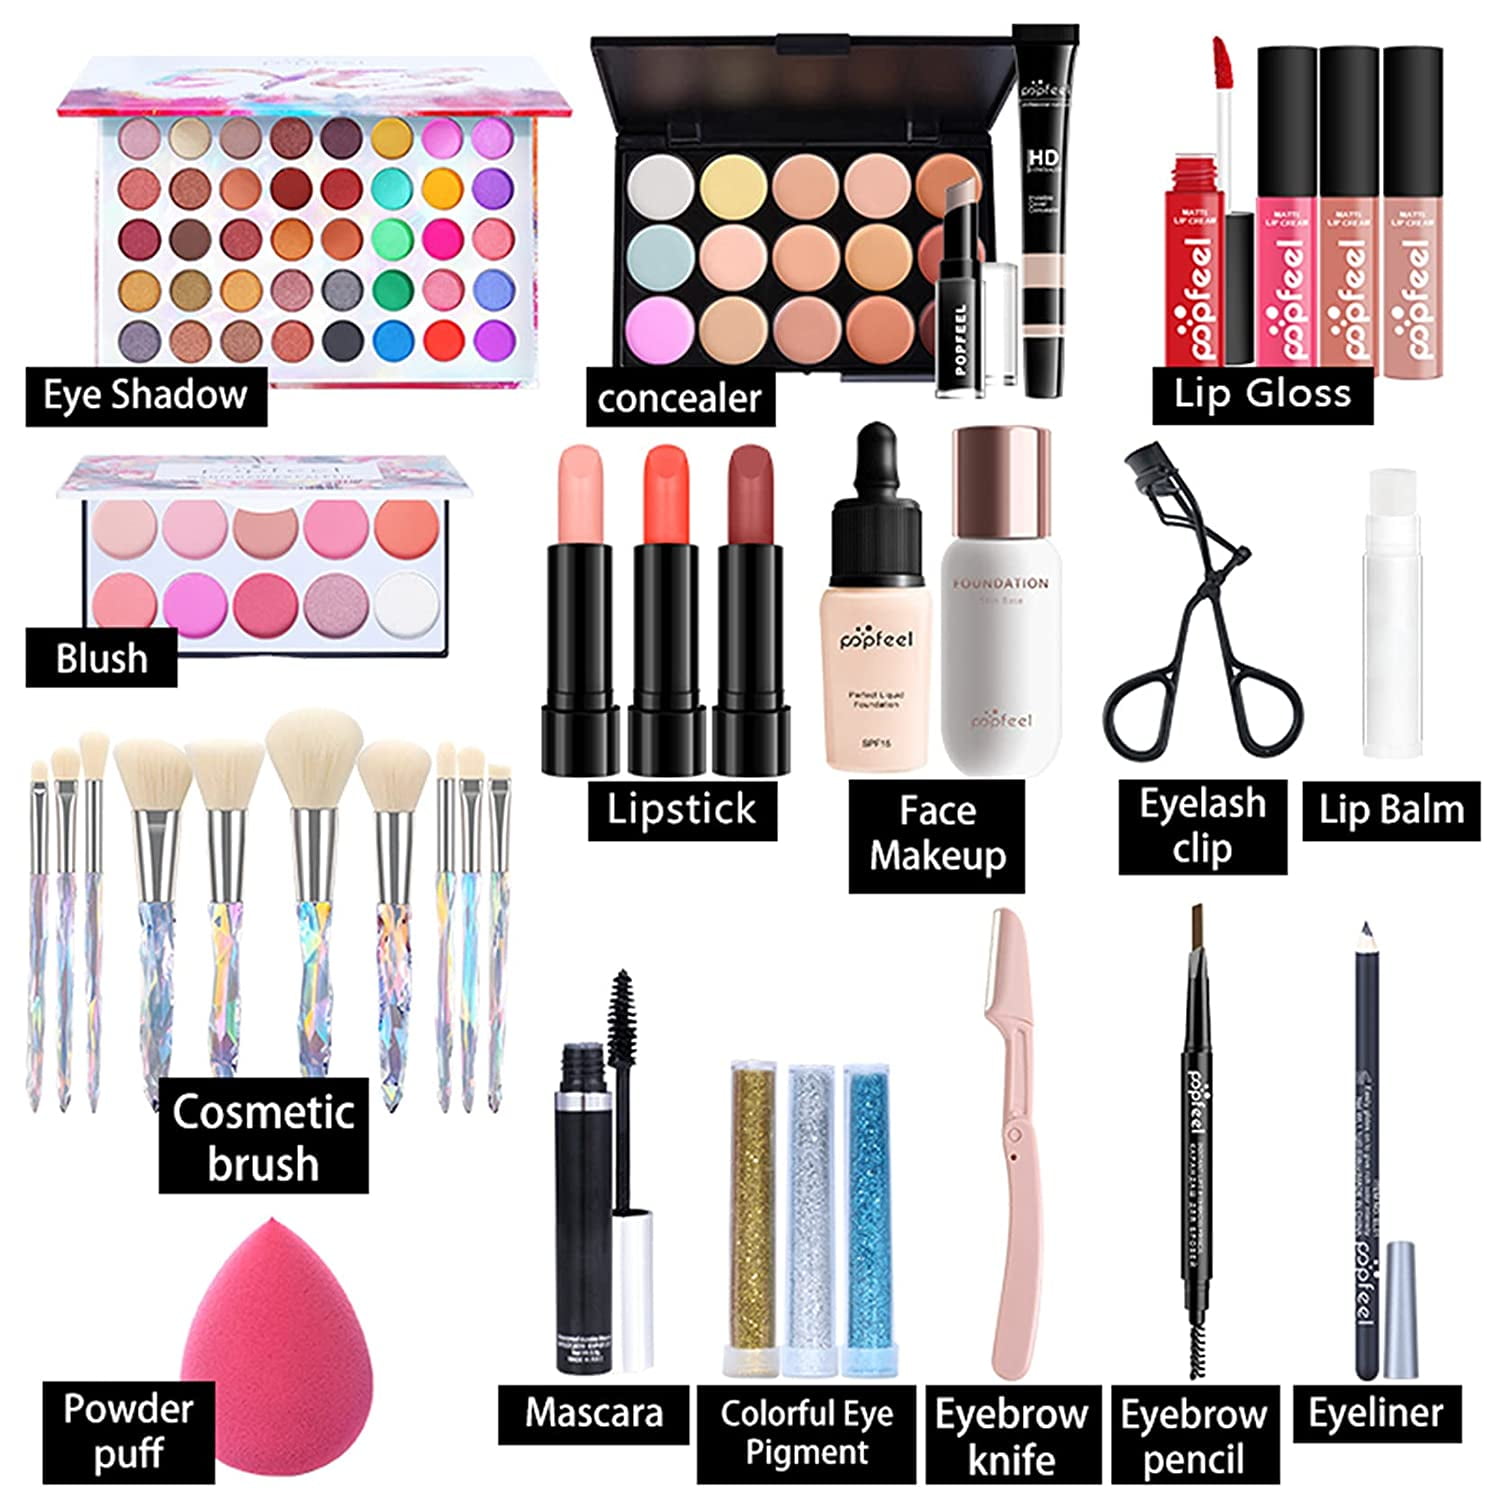 STICKFX - Our NEW Makeup Kit Packs are perfect for self-expression